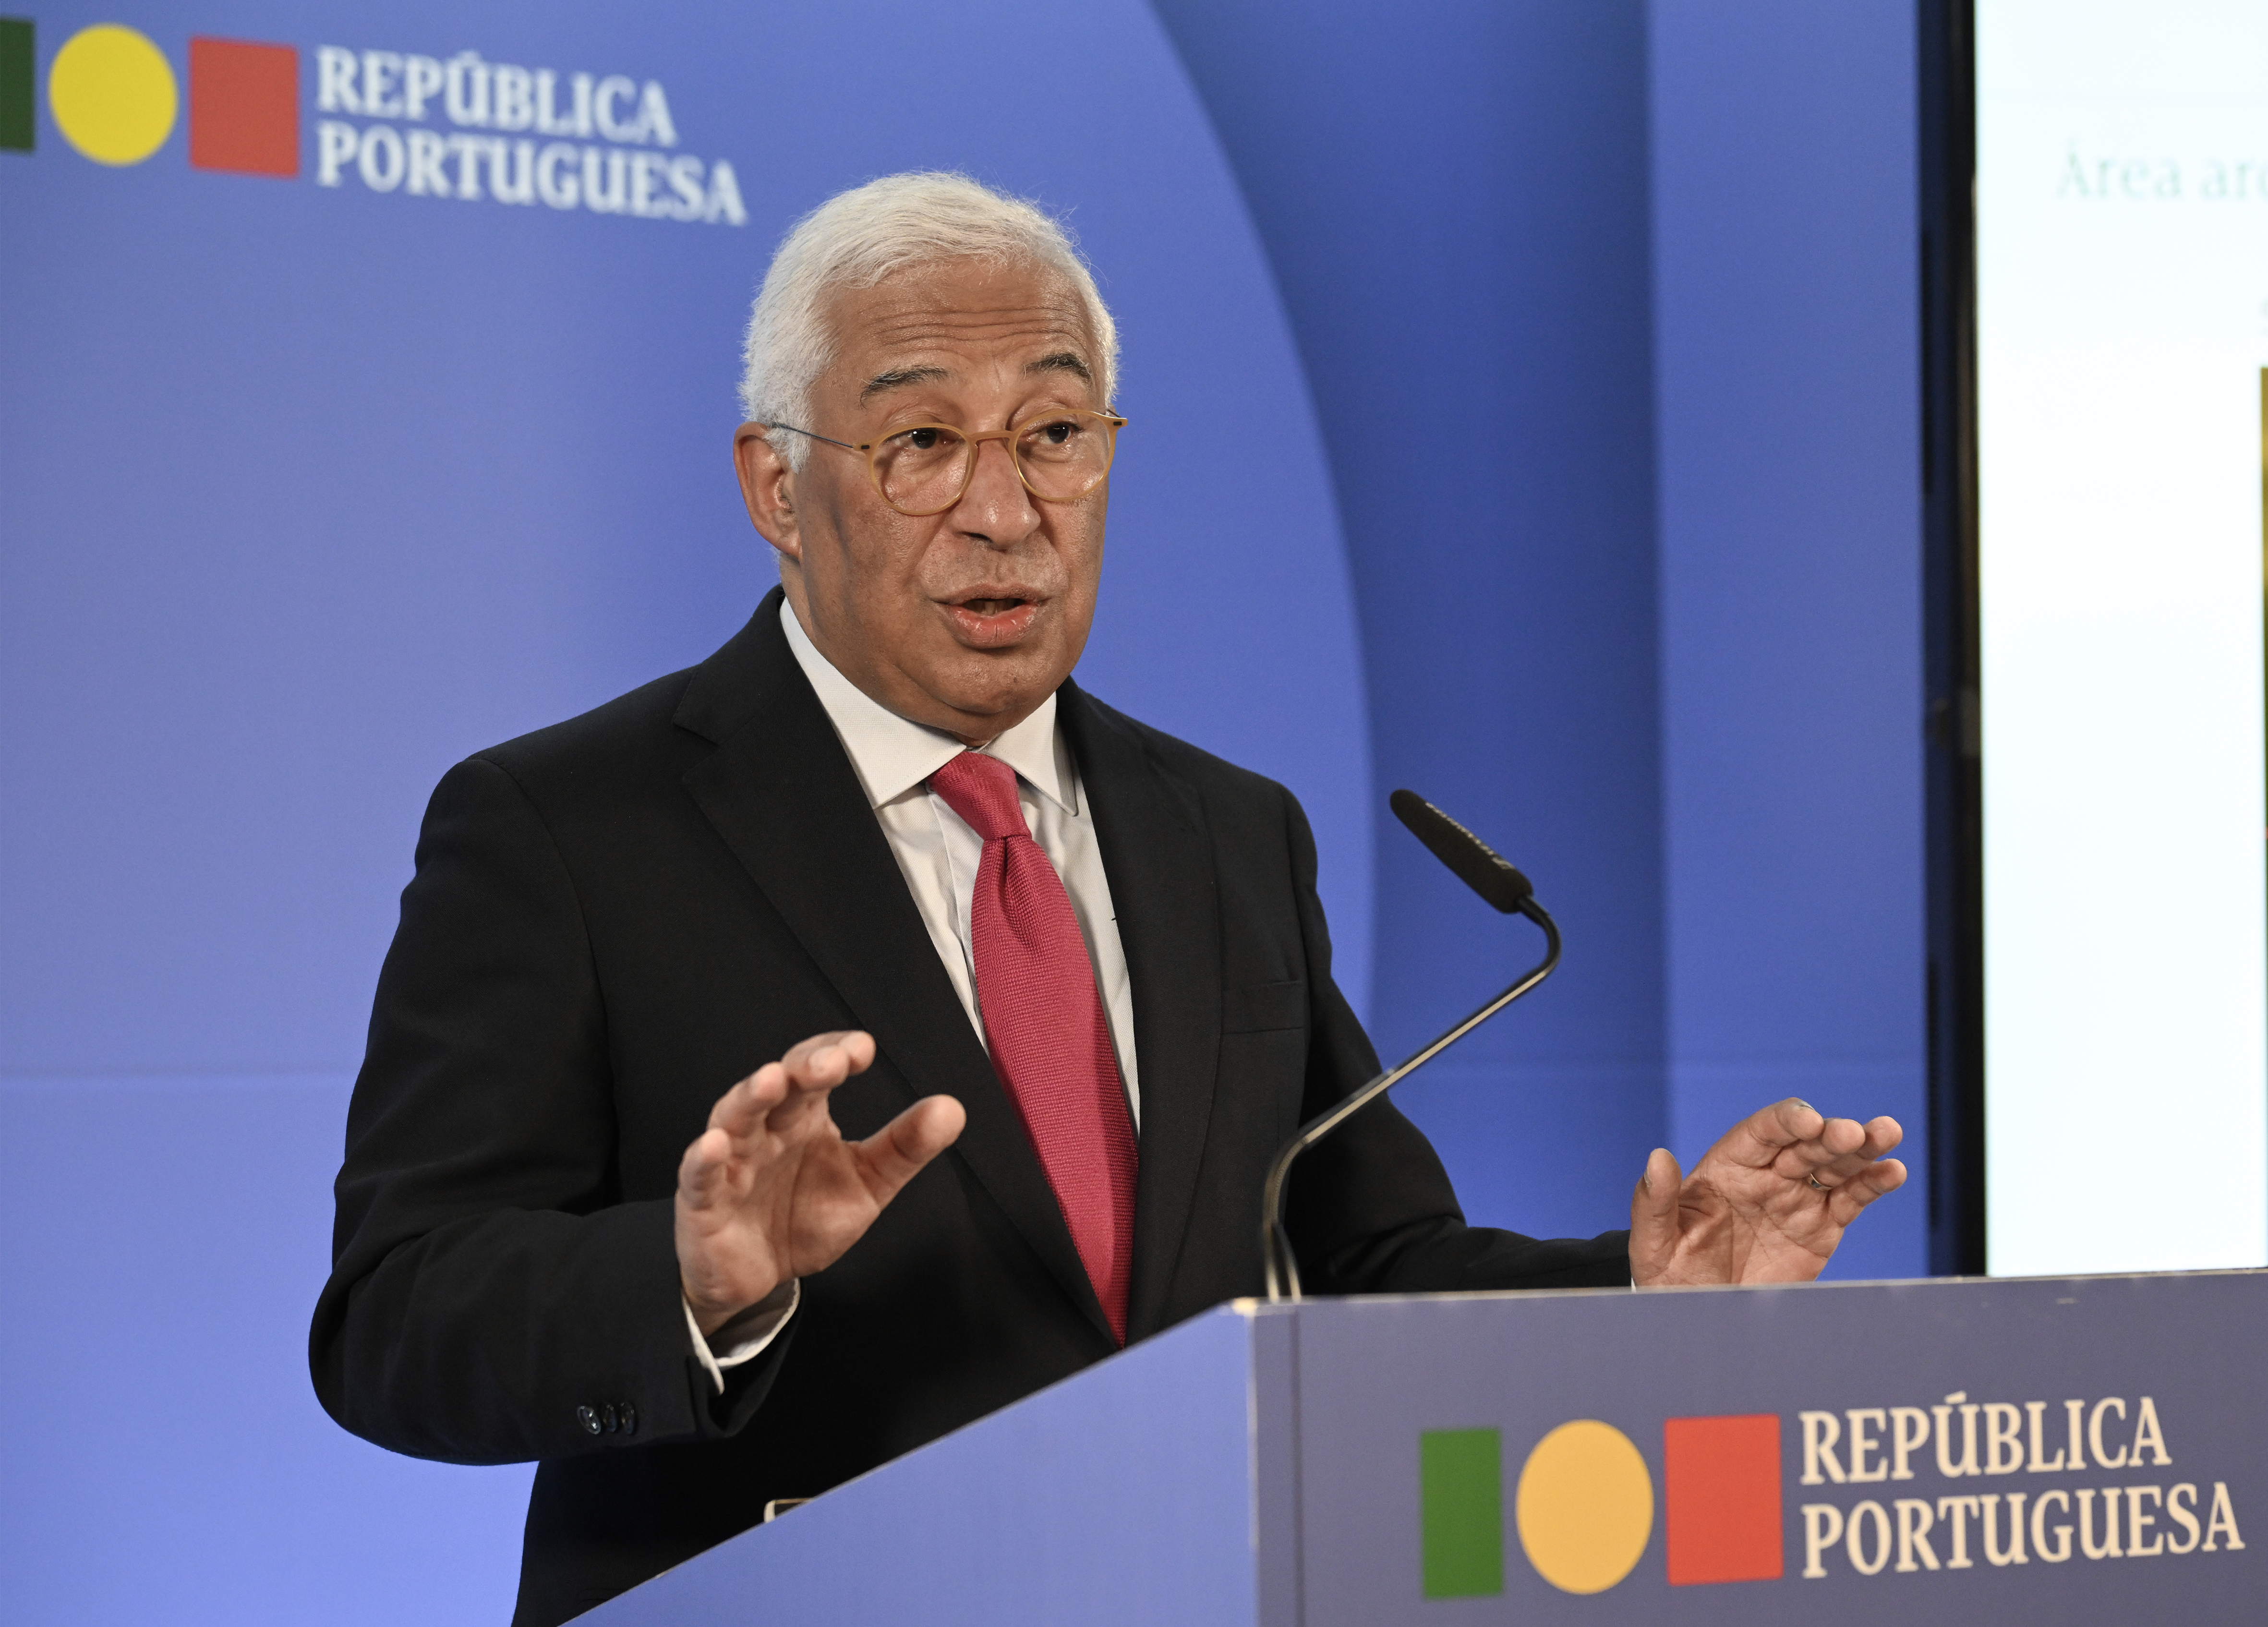 Former Portuguese Prime Minister Antonio Costa gives a speech in front of the old government of Portugal logo